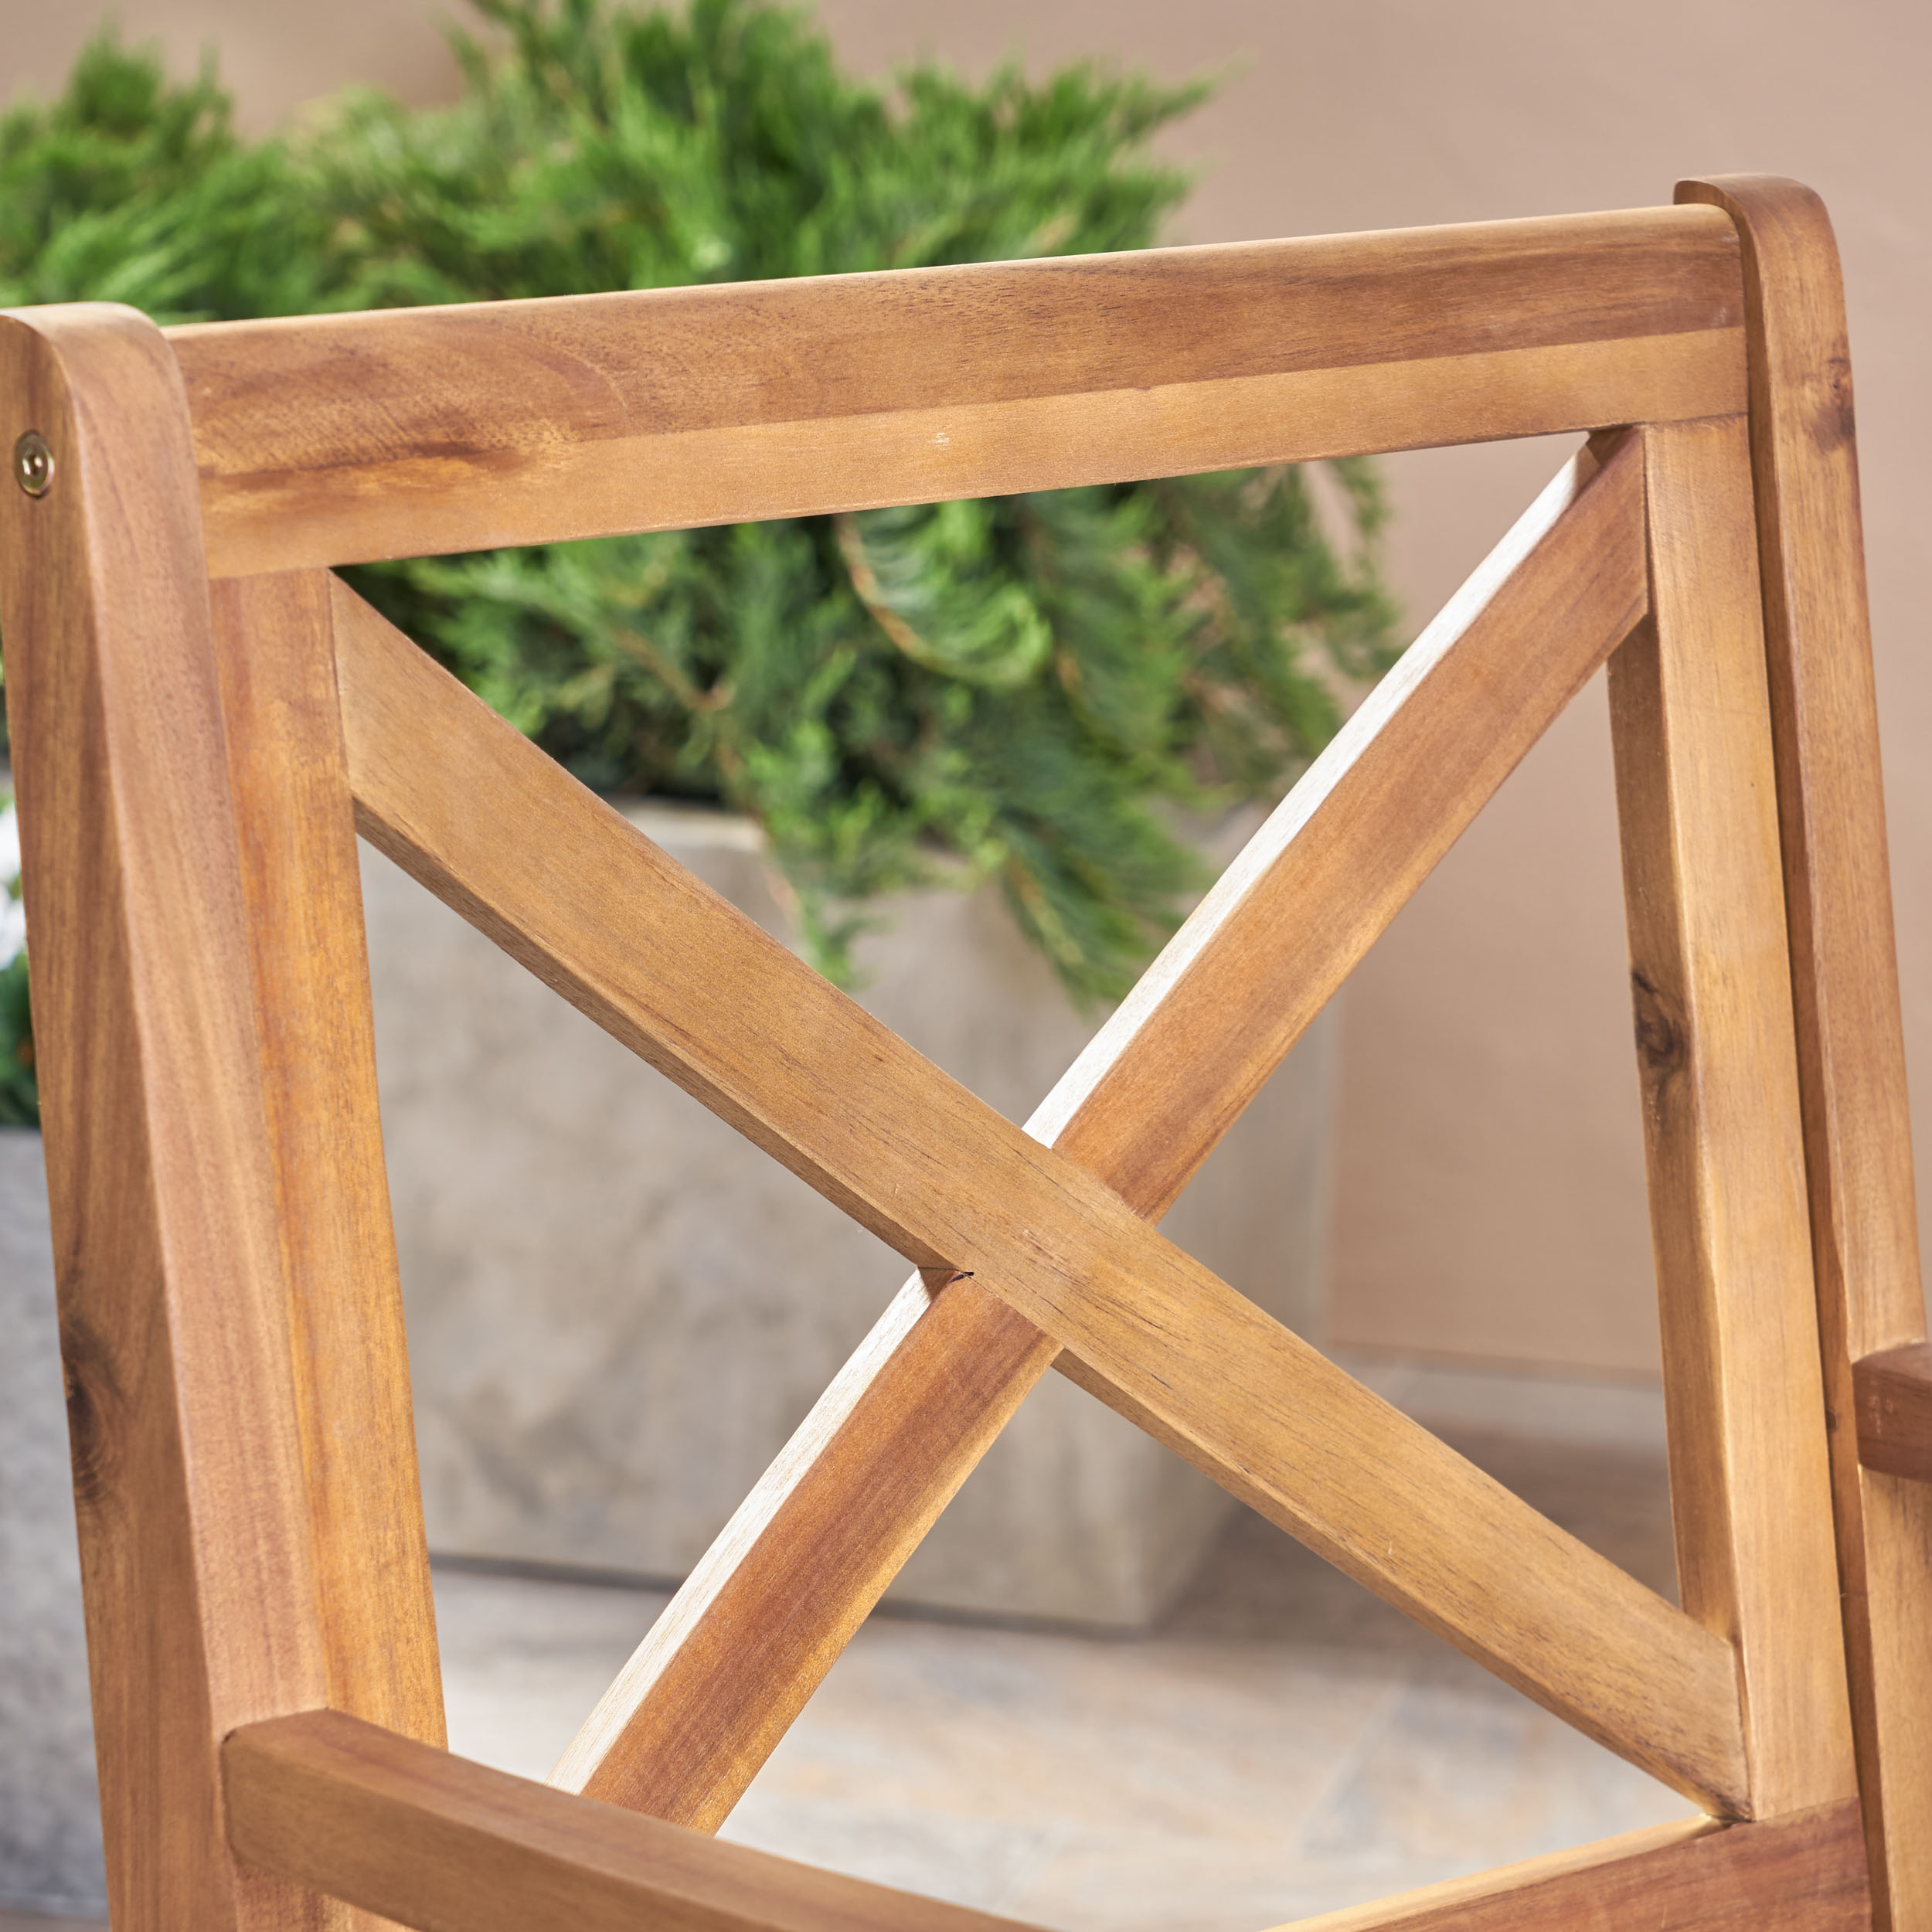 Outdoor Acacia Wood Dining Chair with Cushions, Teak,Green - image 4 of 6